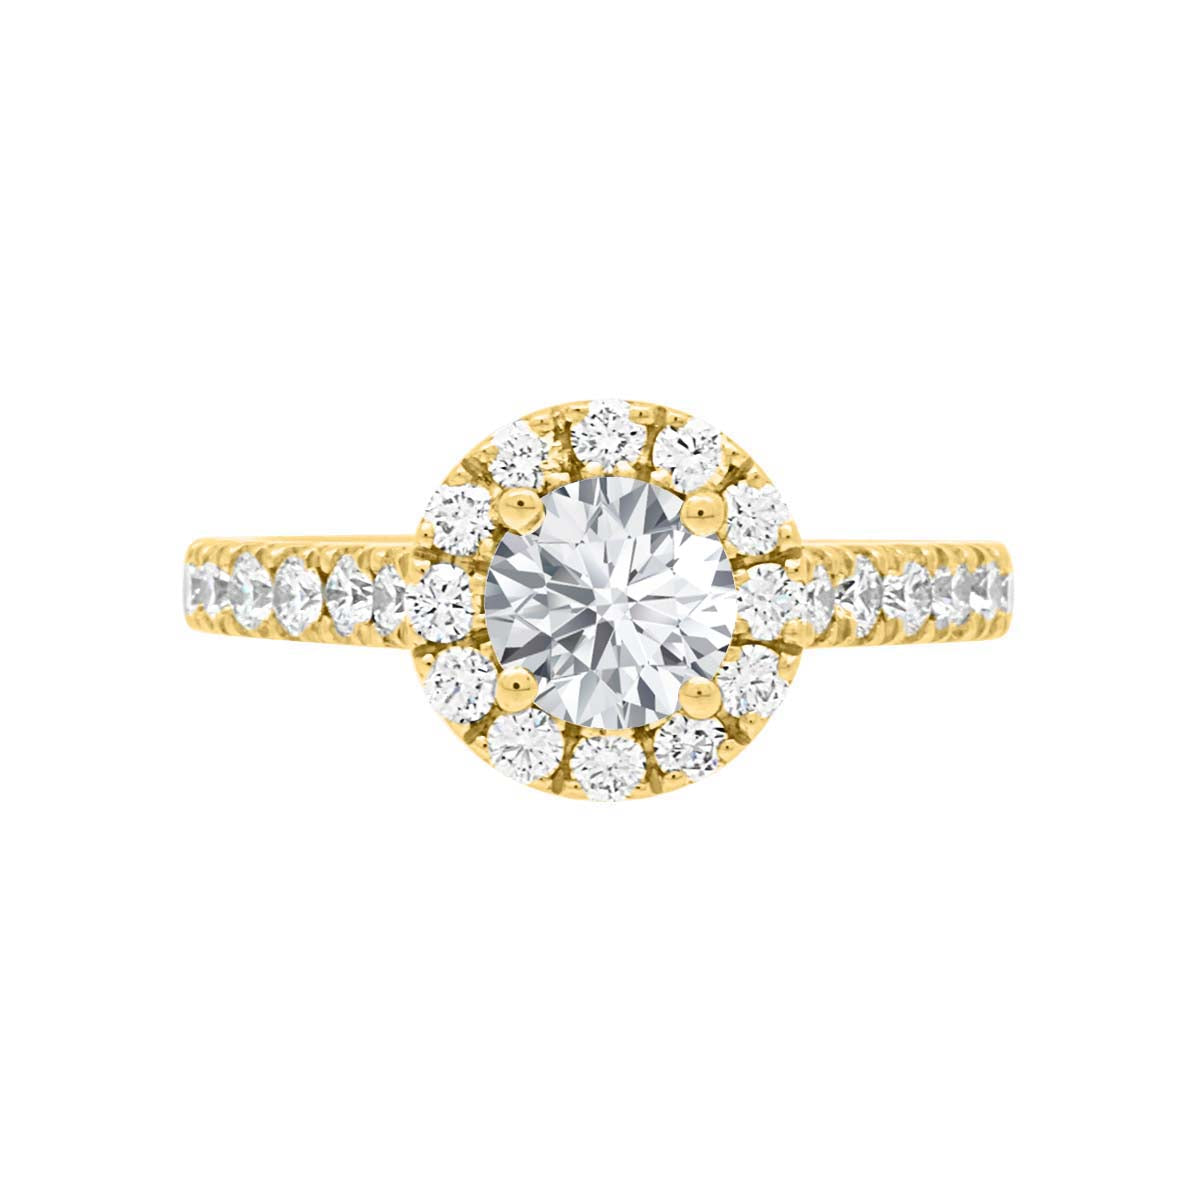 Halo Engagement Ring Diamond Band in yellow gold 